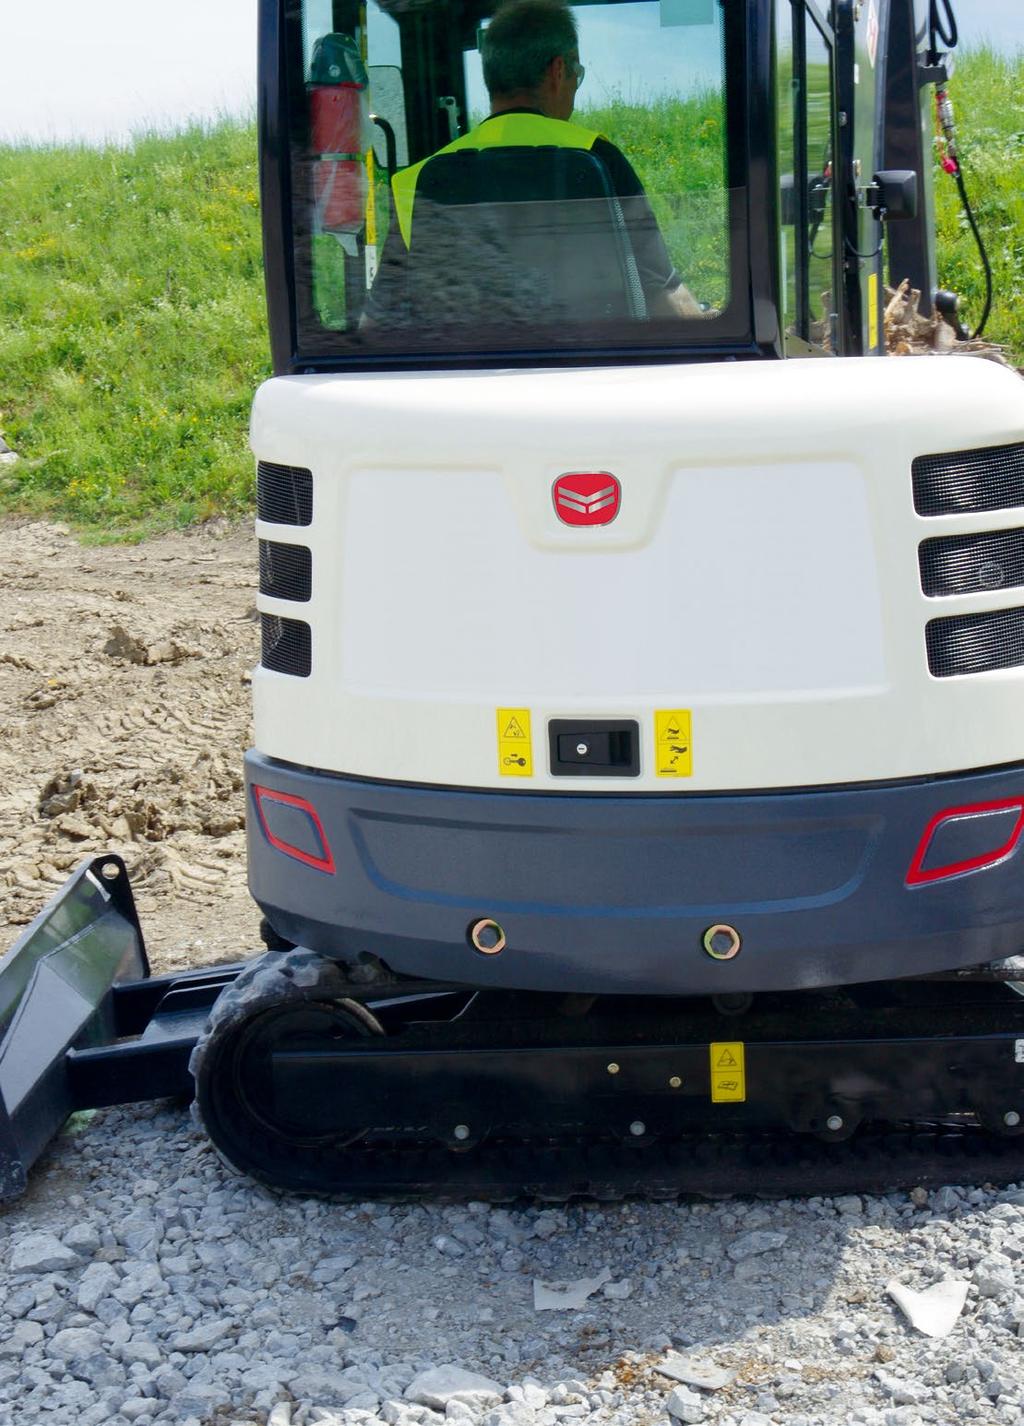 THE SCHAEFF ADVANTAGE HOW DOES A MINI EXCAVATOR FIND ITS PLACE AT YOUR COMPANY?